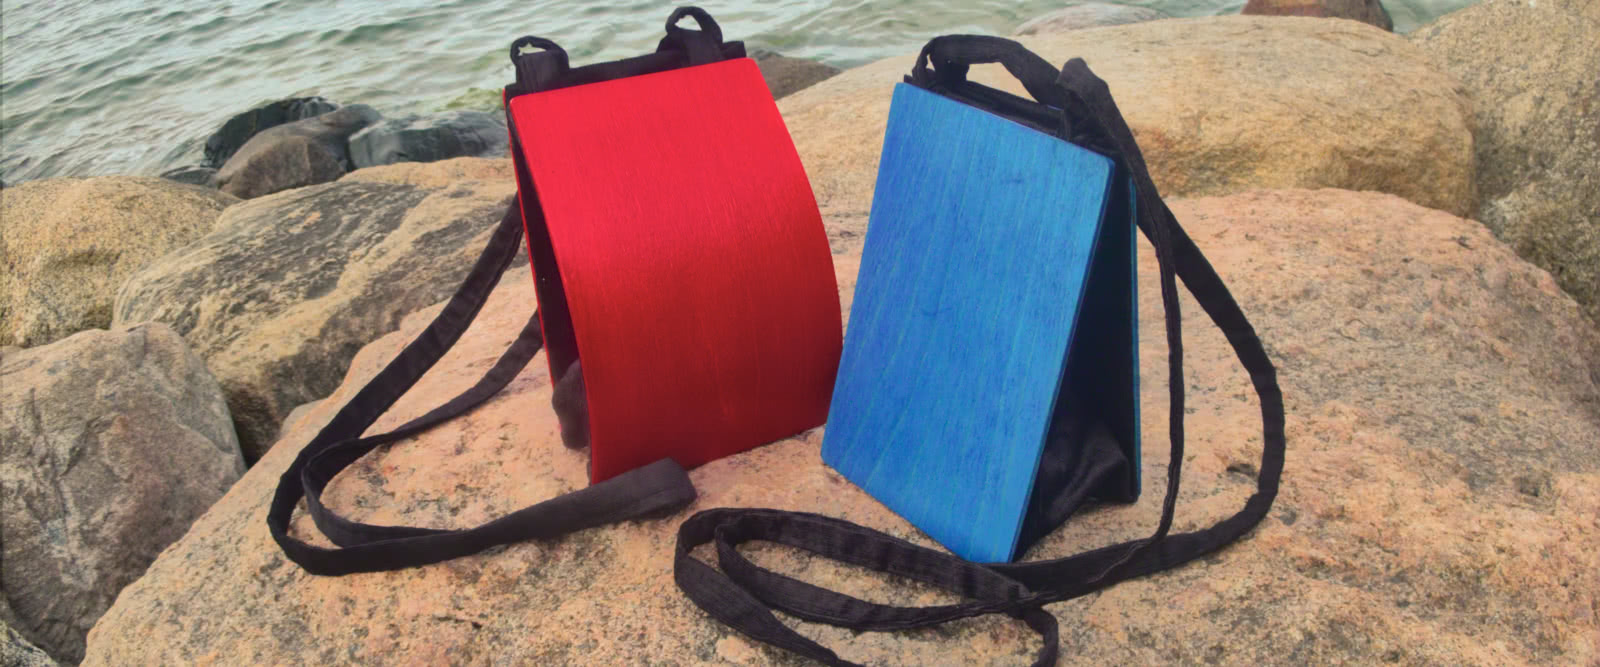 Blue and red bags on a rock